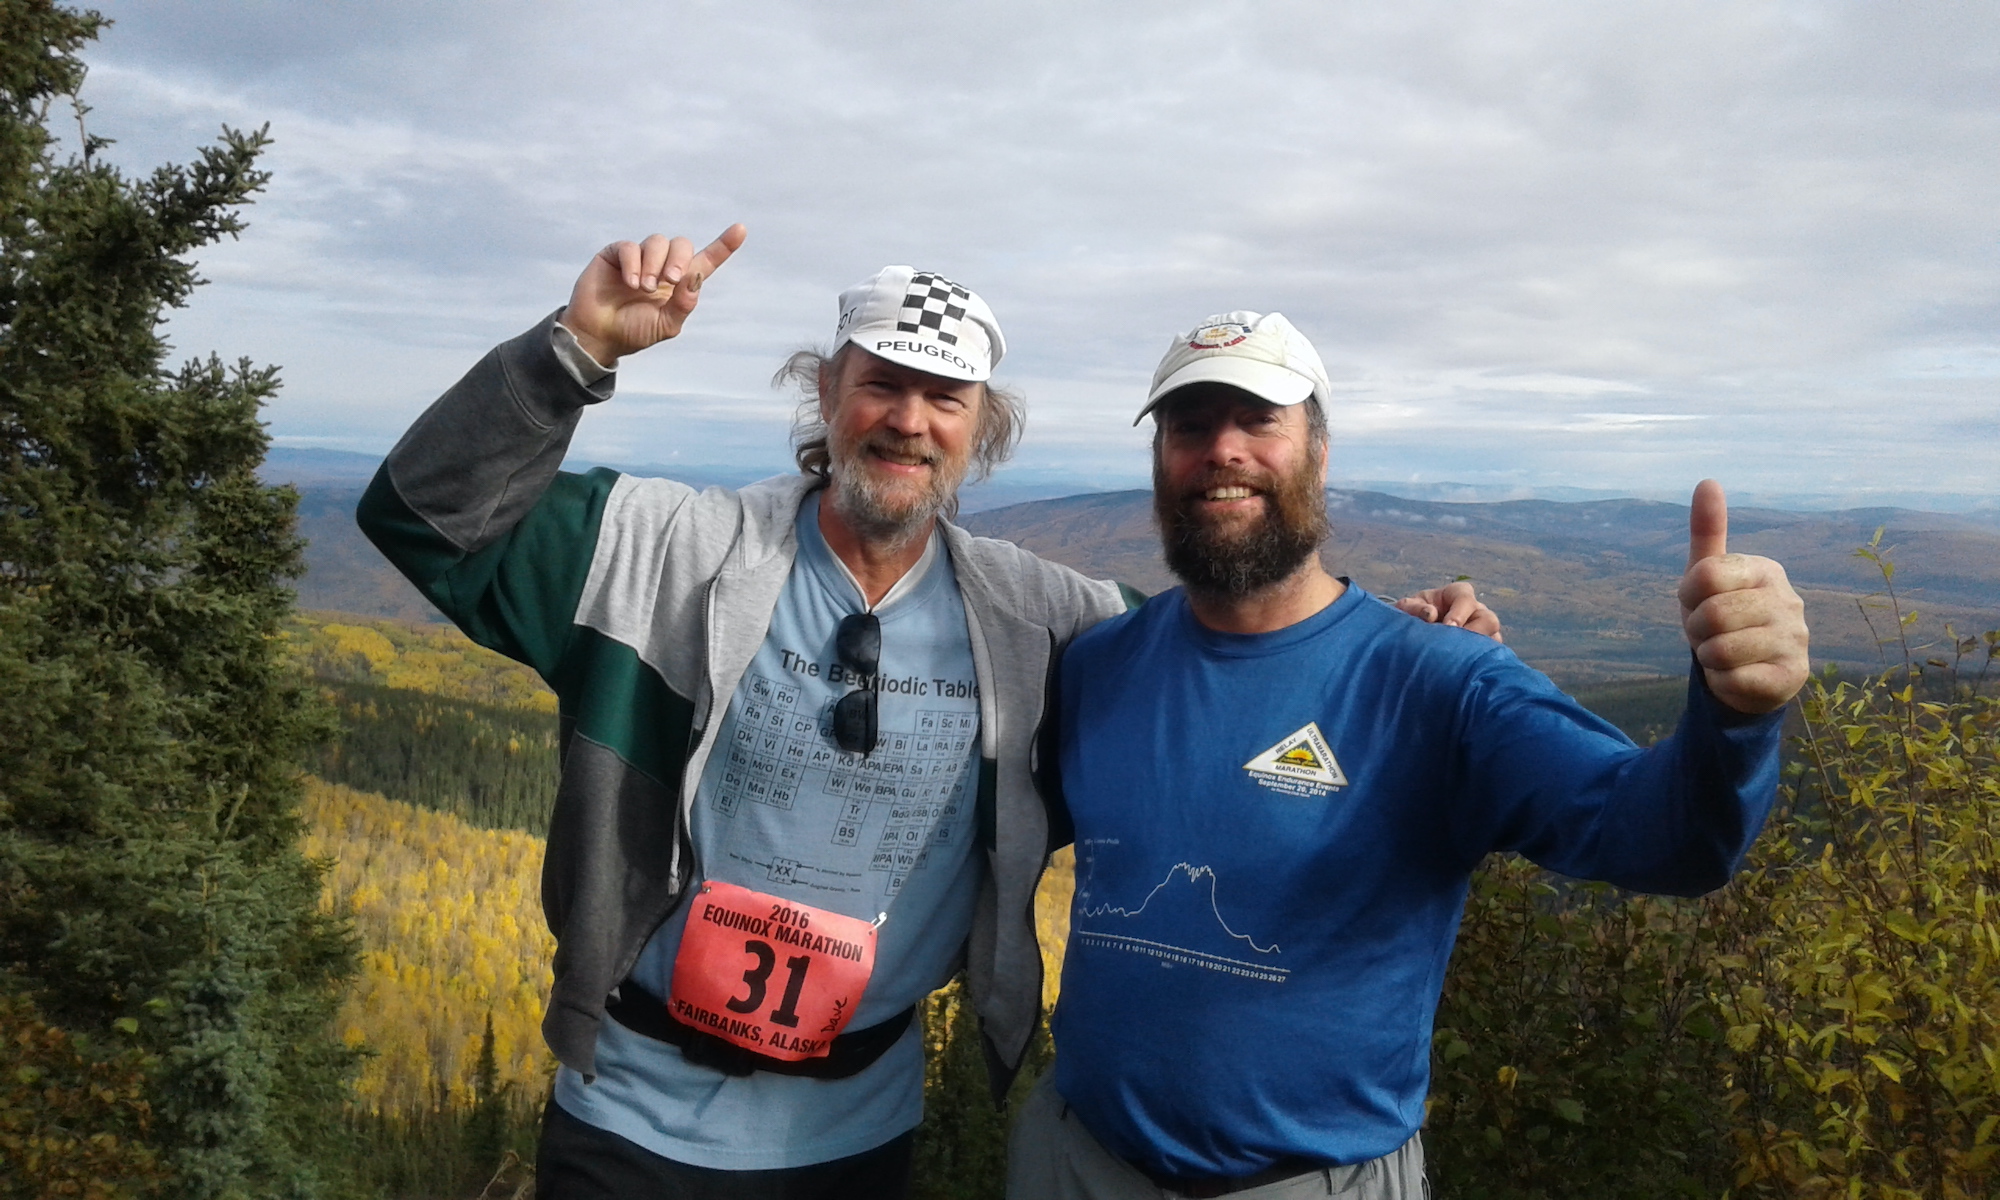 Two bearded men in white hats stand with their arms around their shoulders and point upward. The man on the left has an Equinox Marathon entry bib pinned to his shirt. They're on a high hill with rolling hills covered with golden fall vegetation in the view behind them.